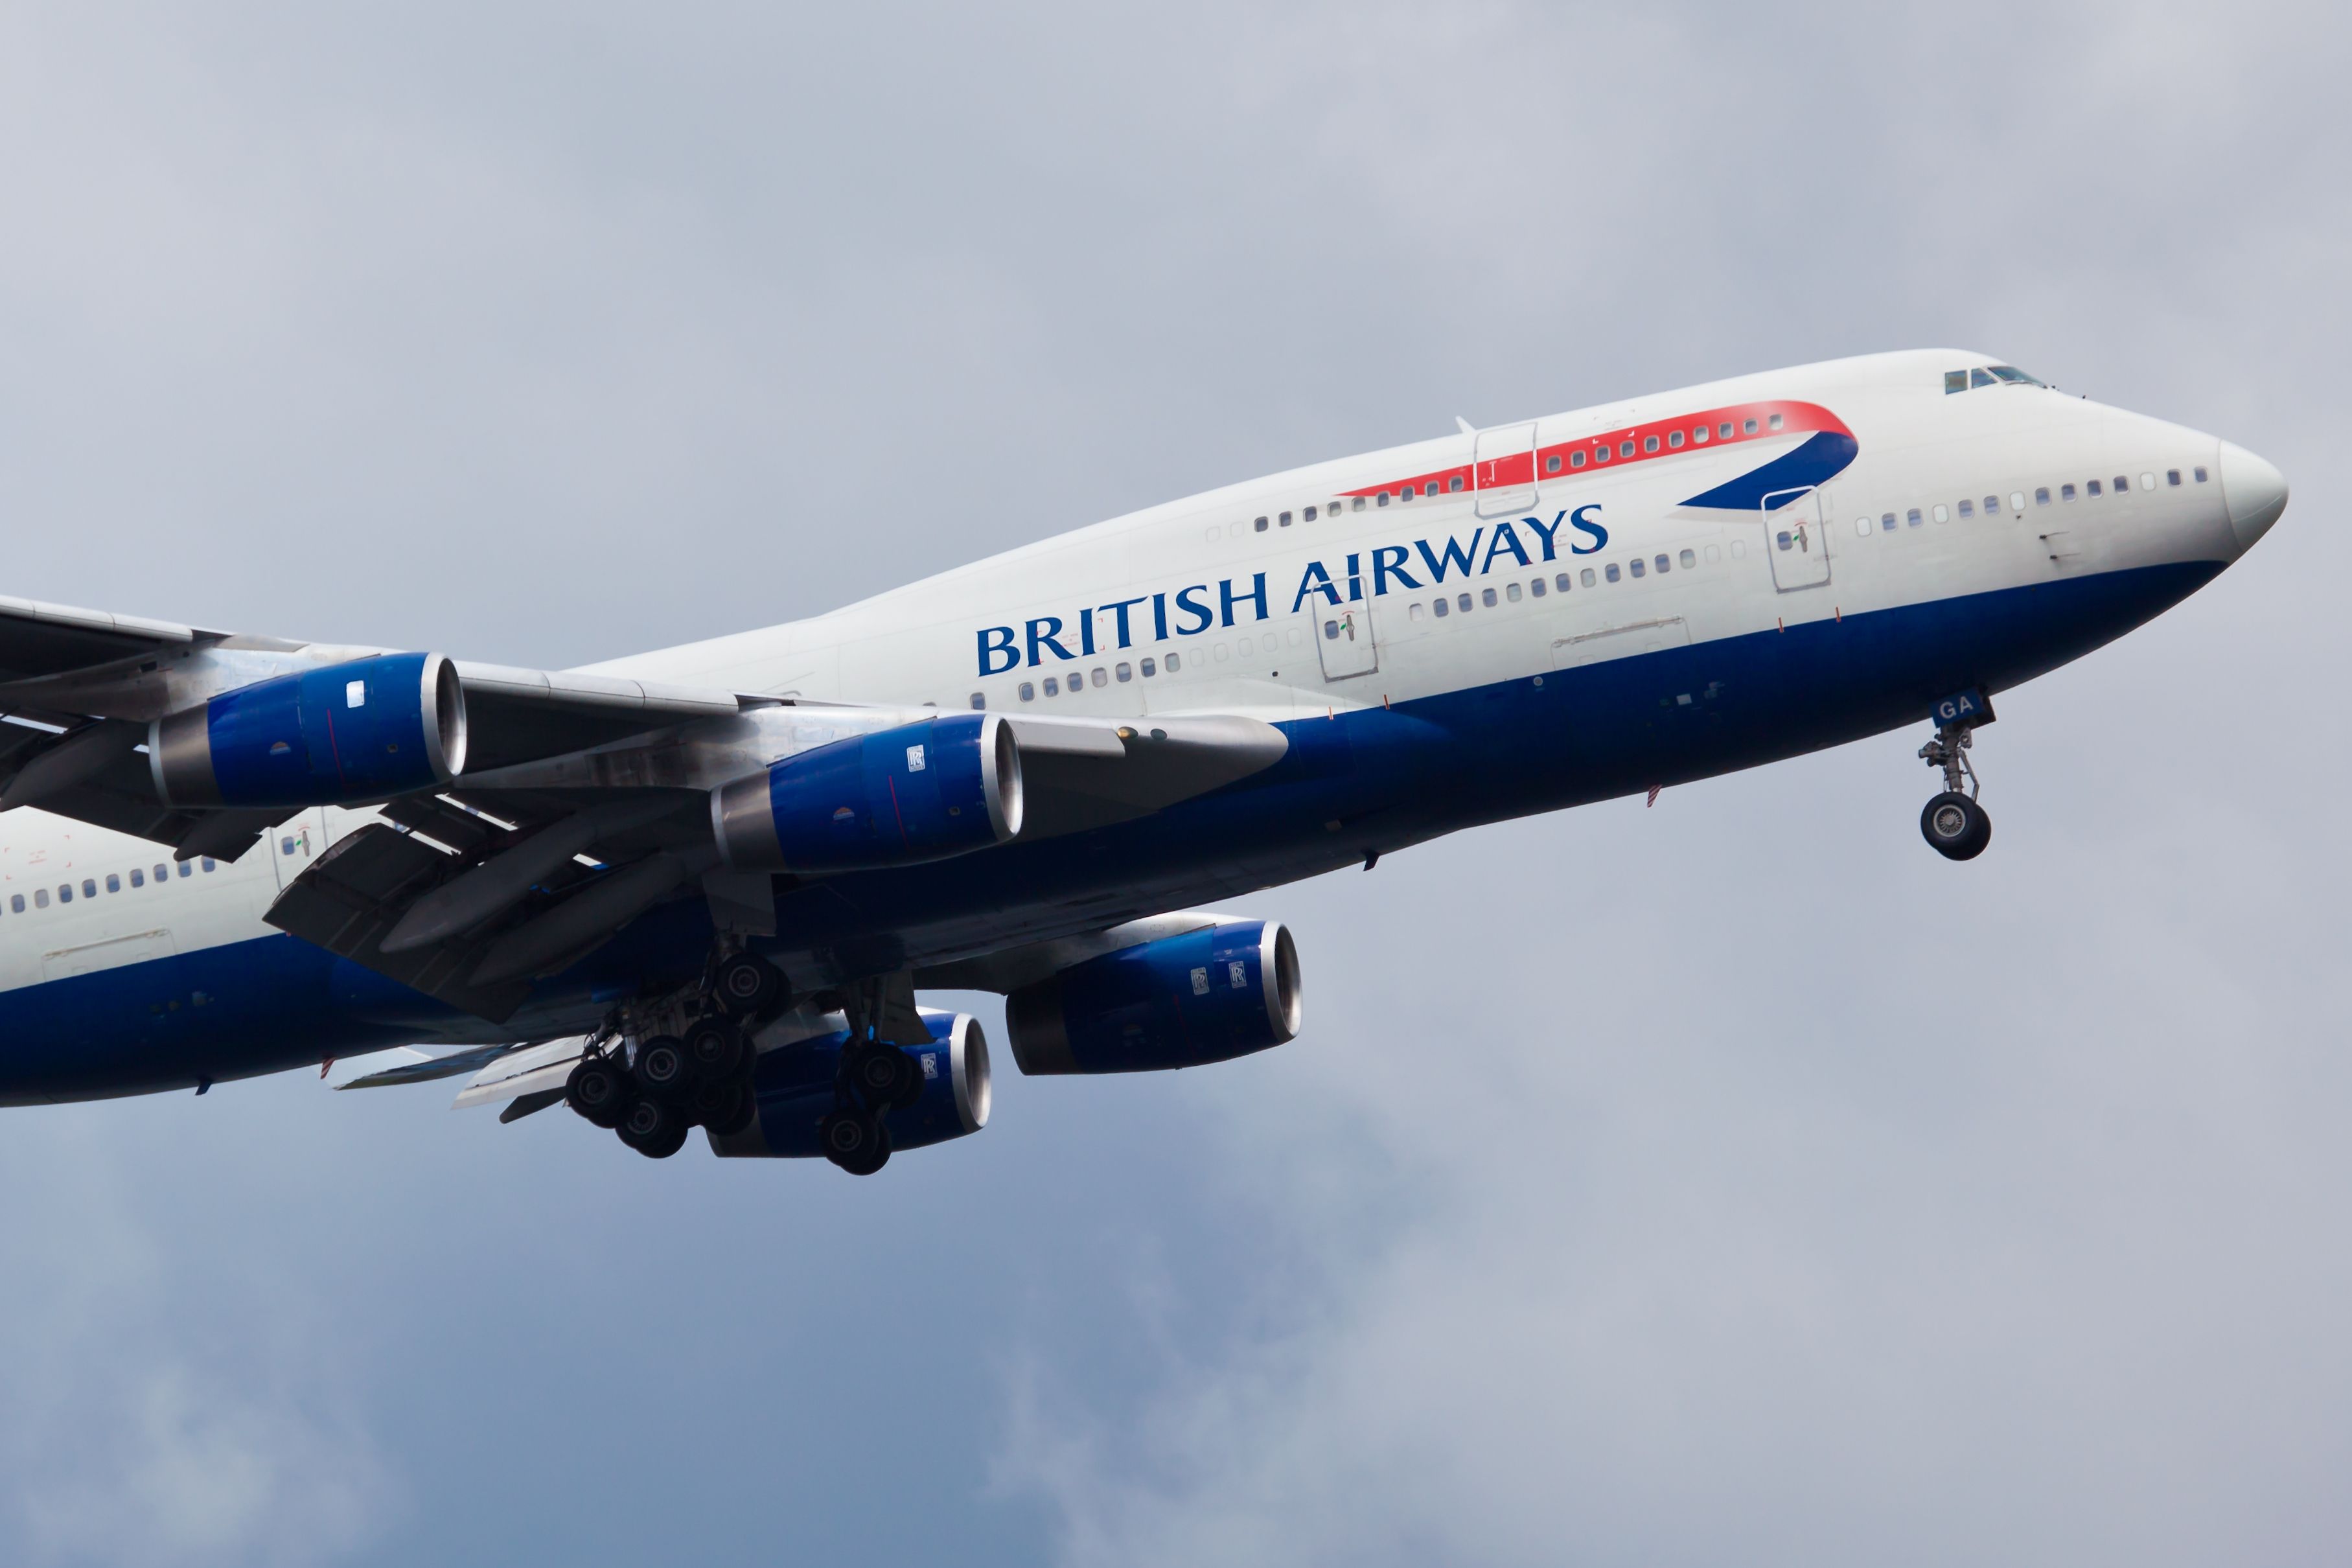 A British Airways Boeing 747 flying in the sky.